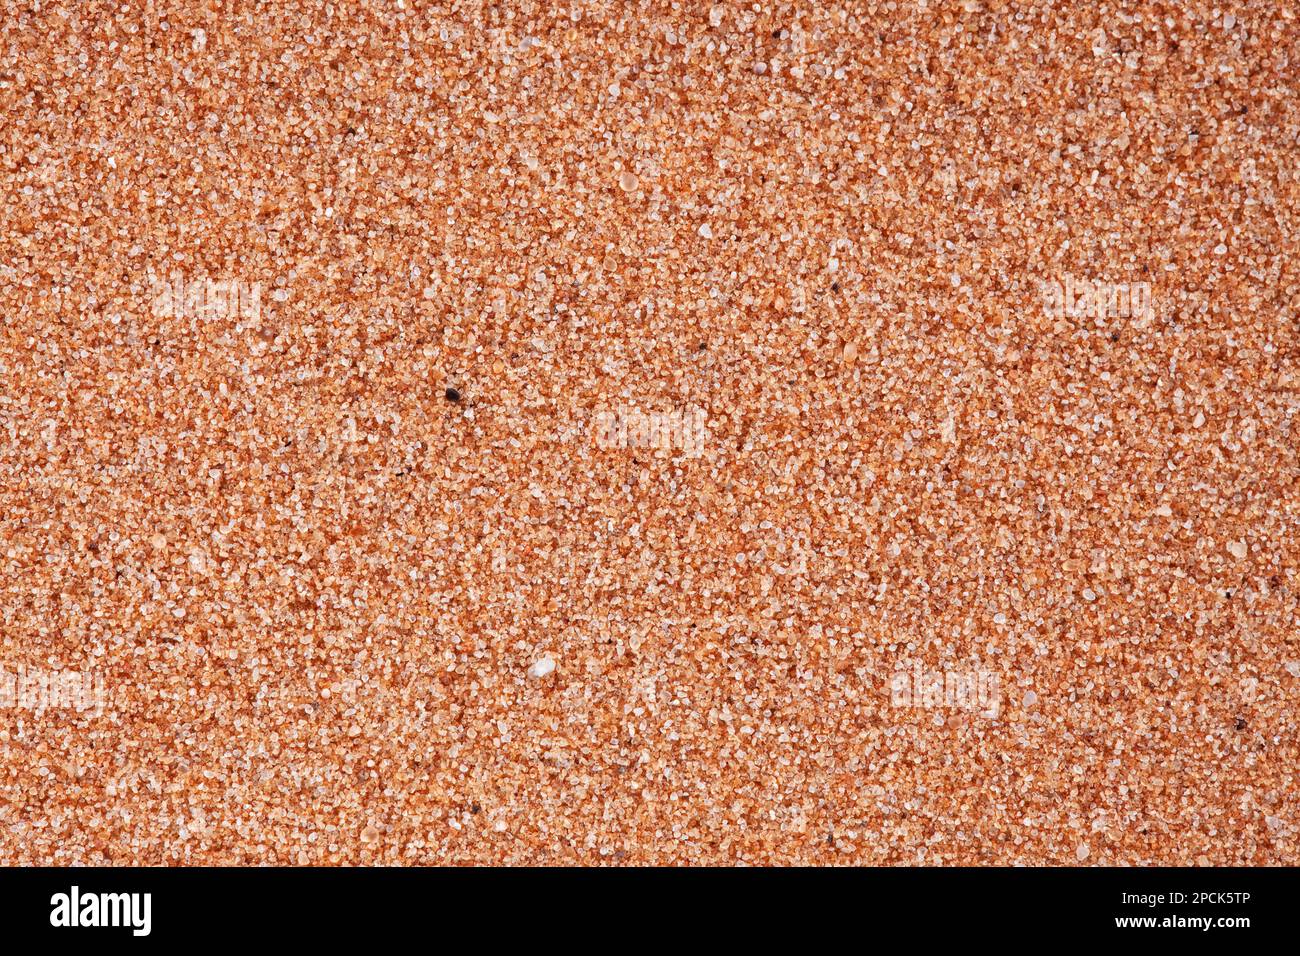 A close up of red sandstone sand, Utah Stock Photo